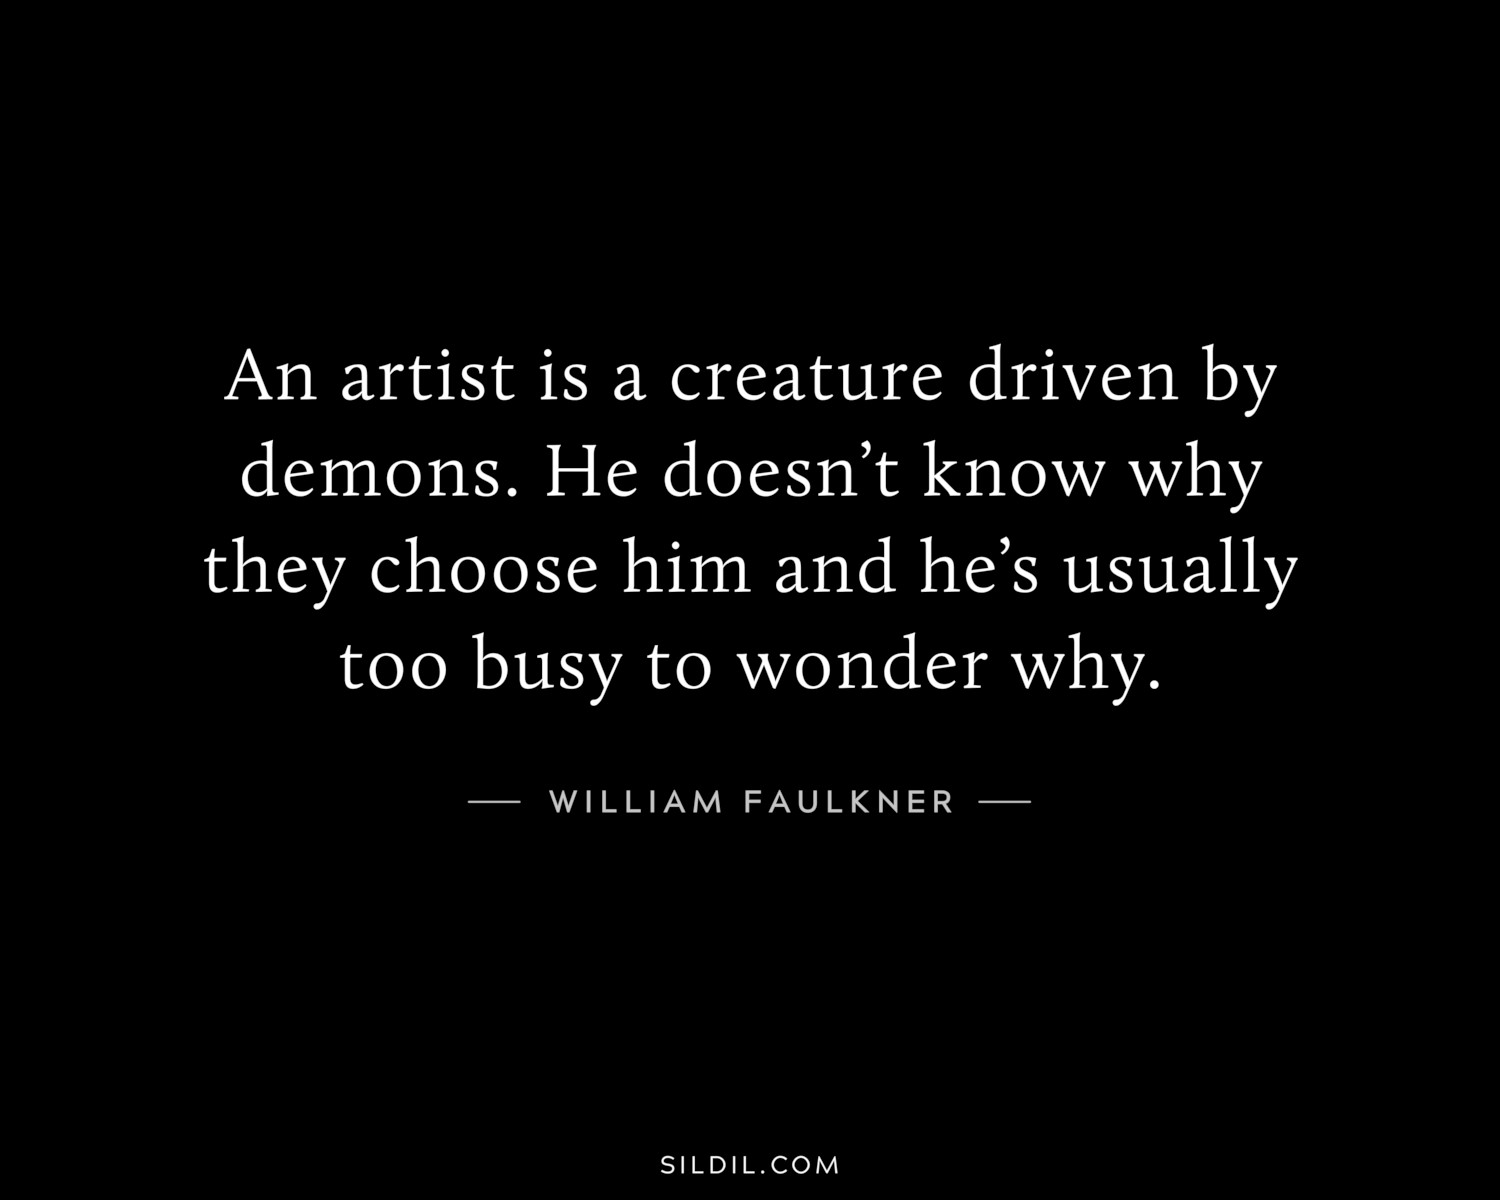 An artist is a creature driven by demons. He doesn’t know why they choose him and he’s usually too busy to wonder why.